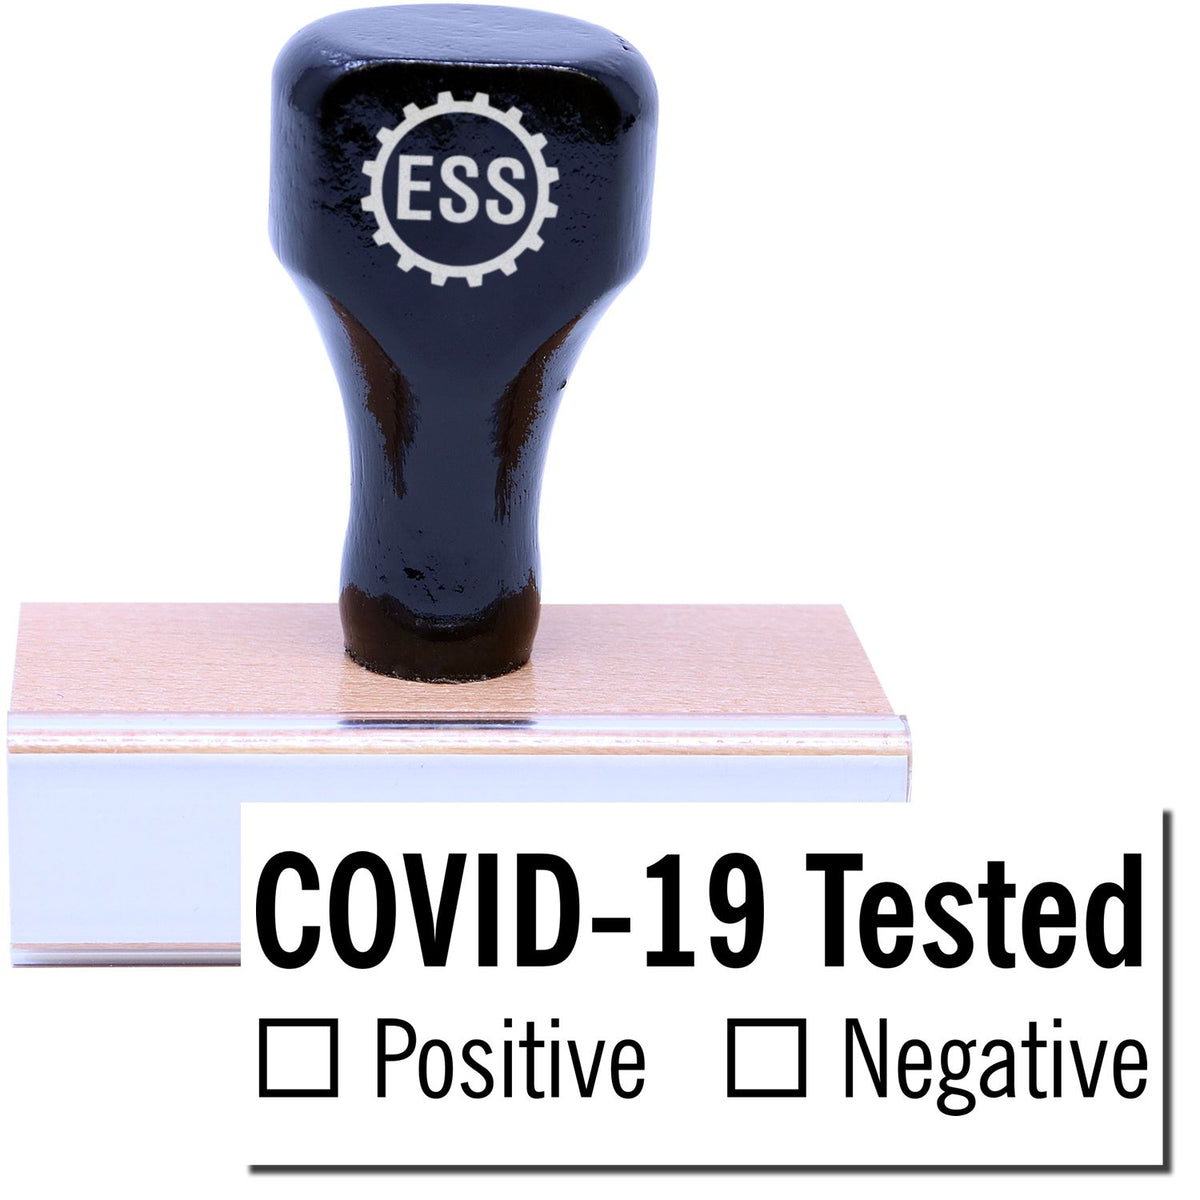 A stock office rubber stamp with a stamped image showing how the text &quot;COVID-19 Tested&quot; with a space underneath where a box can be checked based on whether a person is positive or negative for the virus is displayed after stamping.